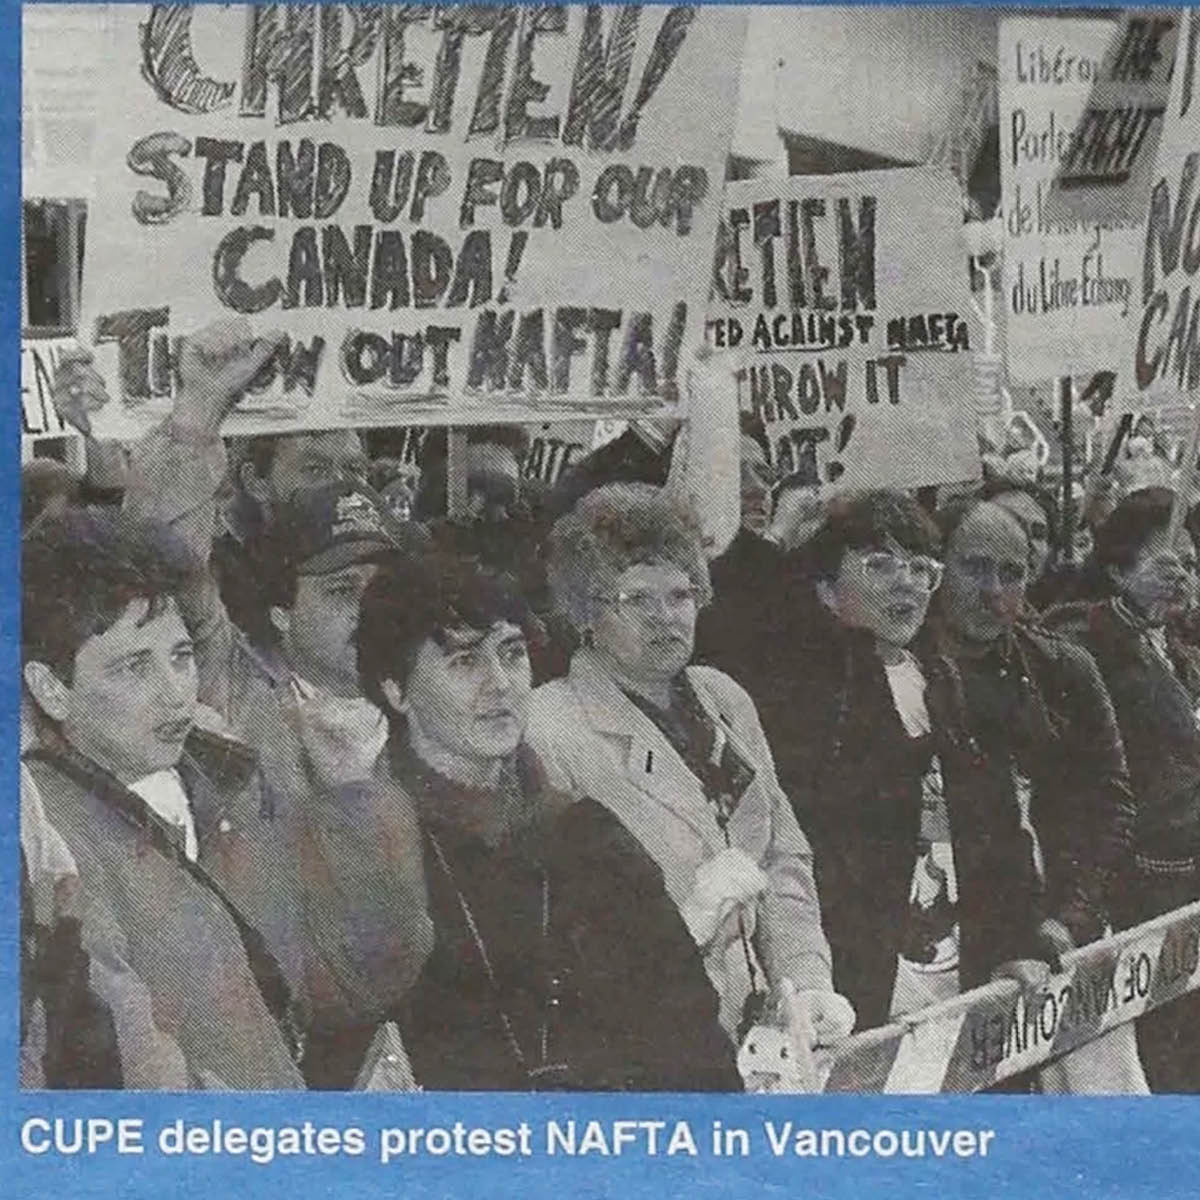 CUPE members protest NAFTA